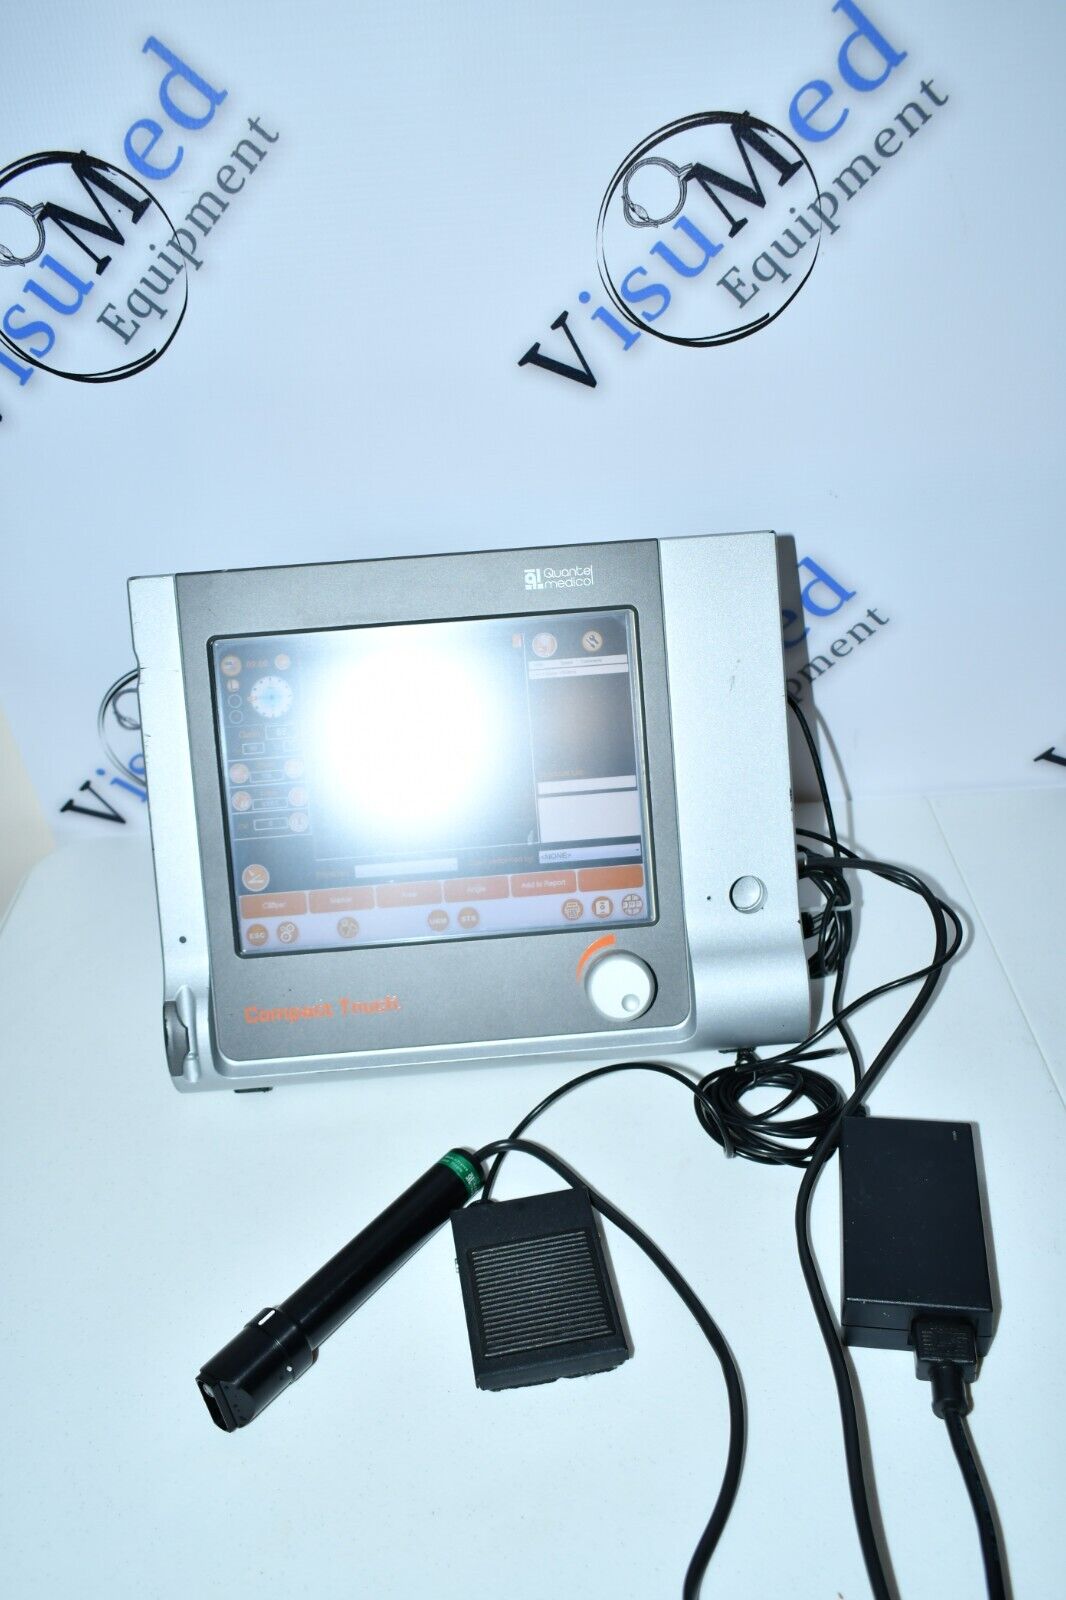 Quantel compact touch STS UBM ultrasound